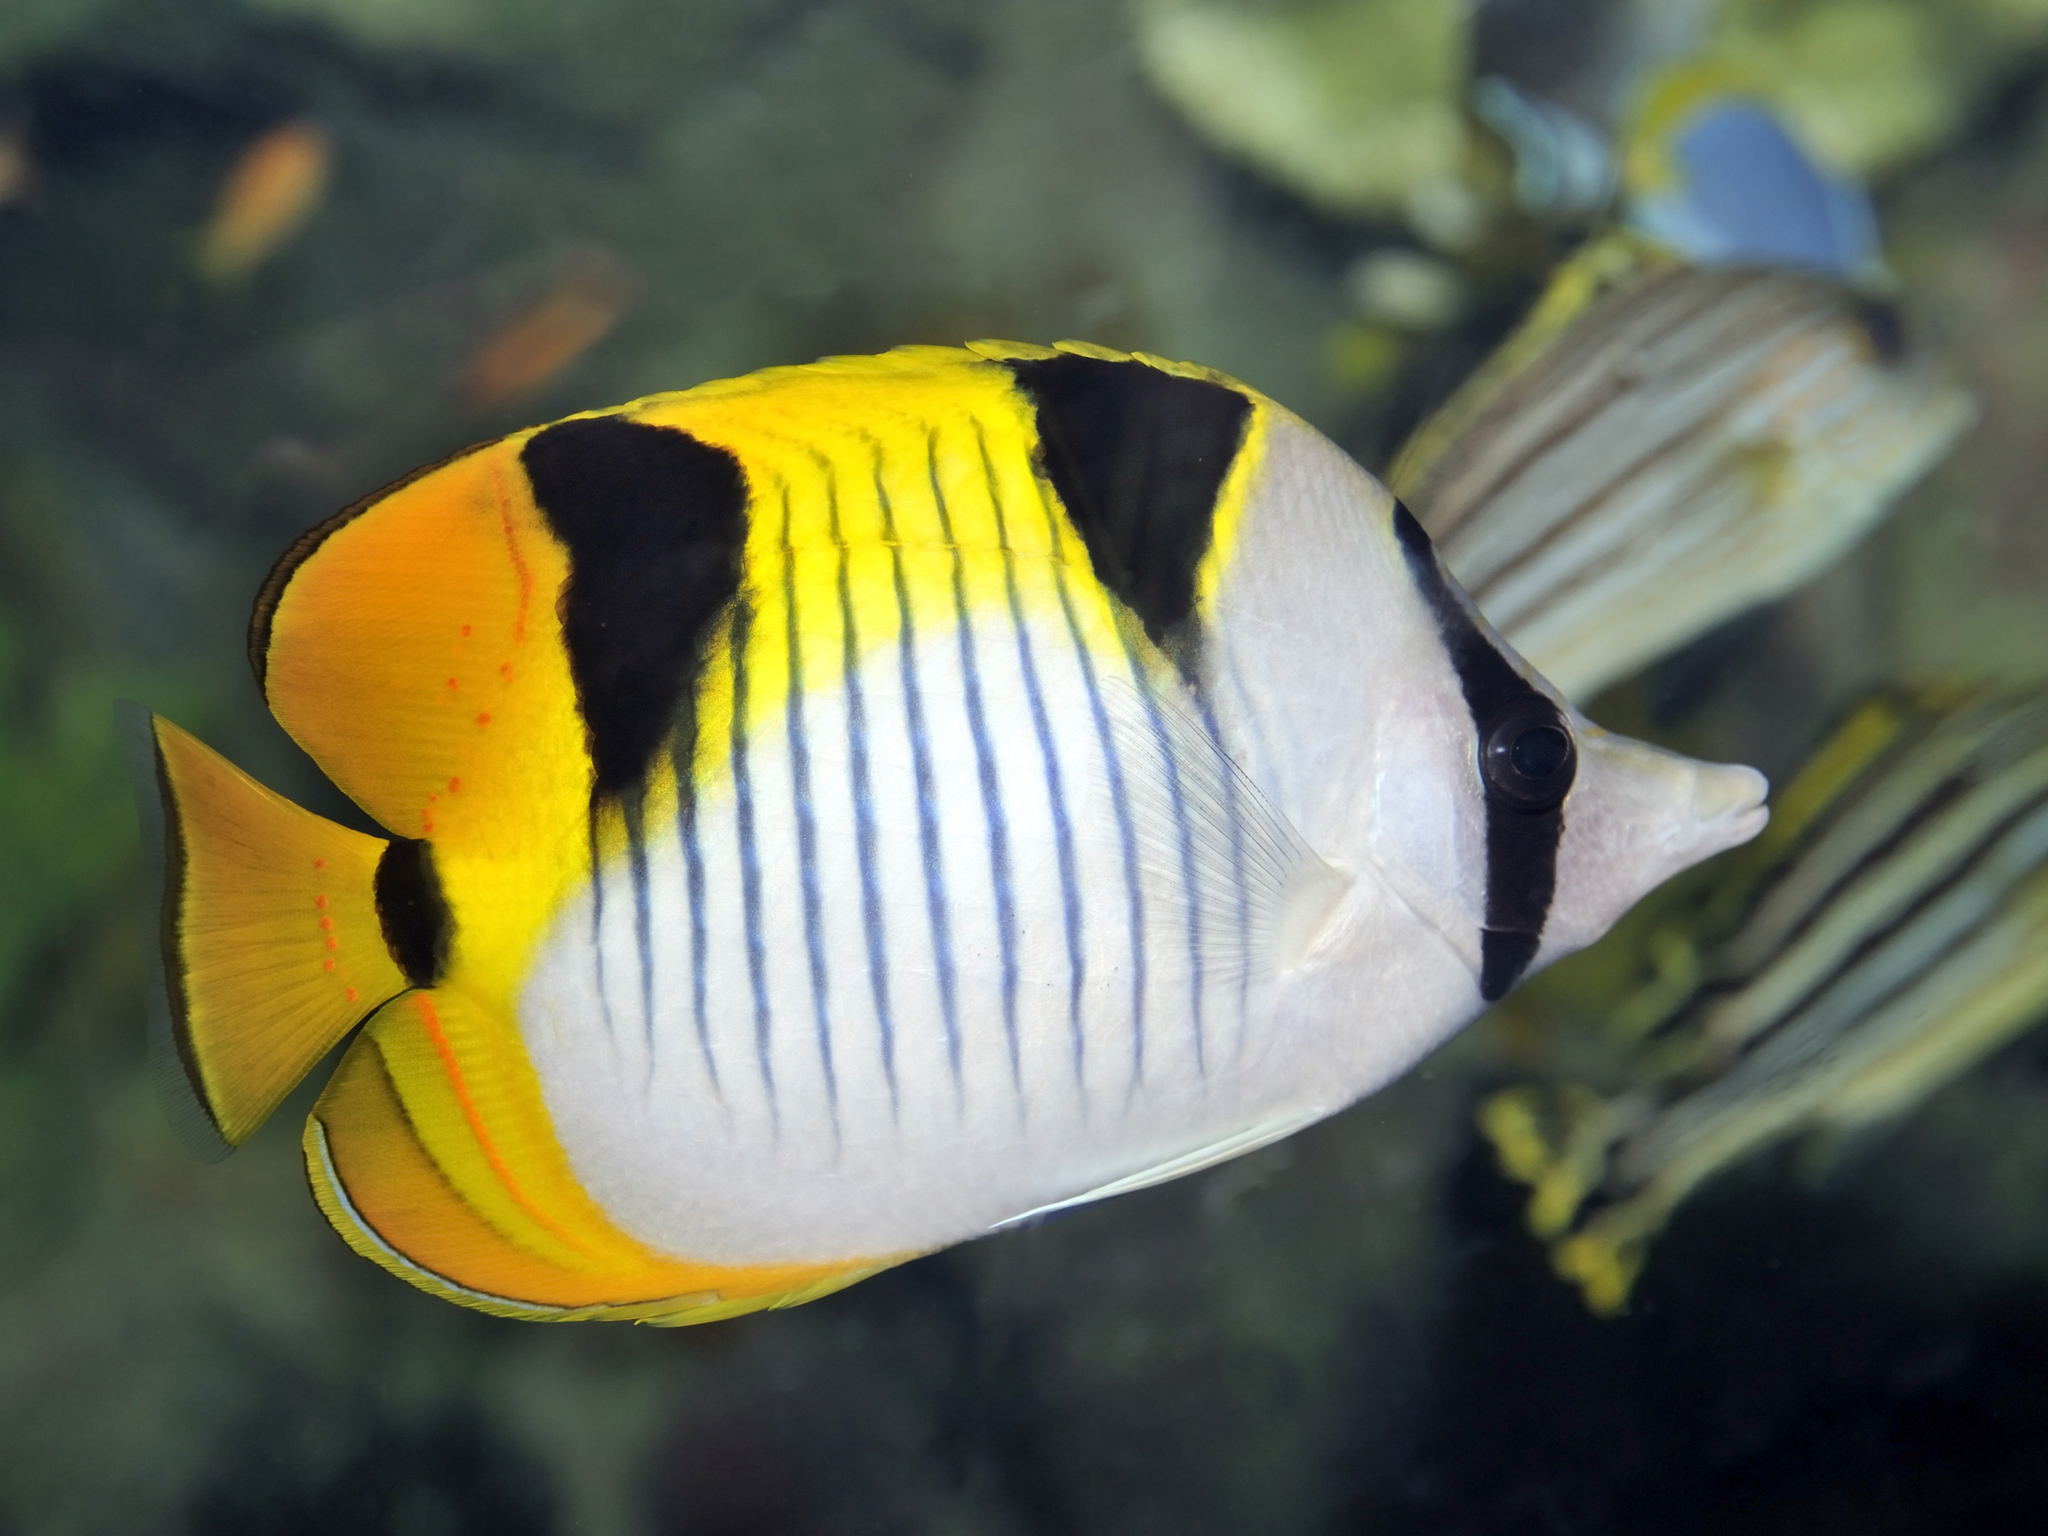 white, yellow and black tropical fish